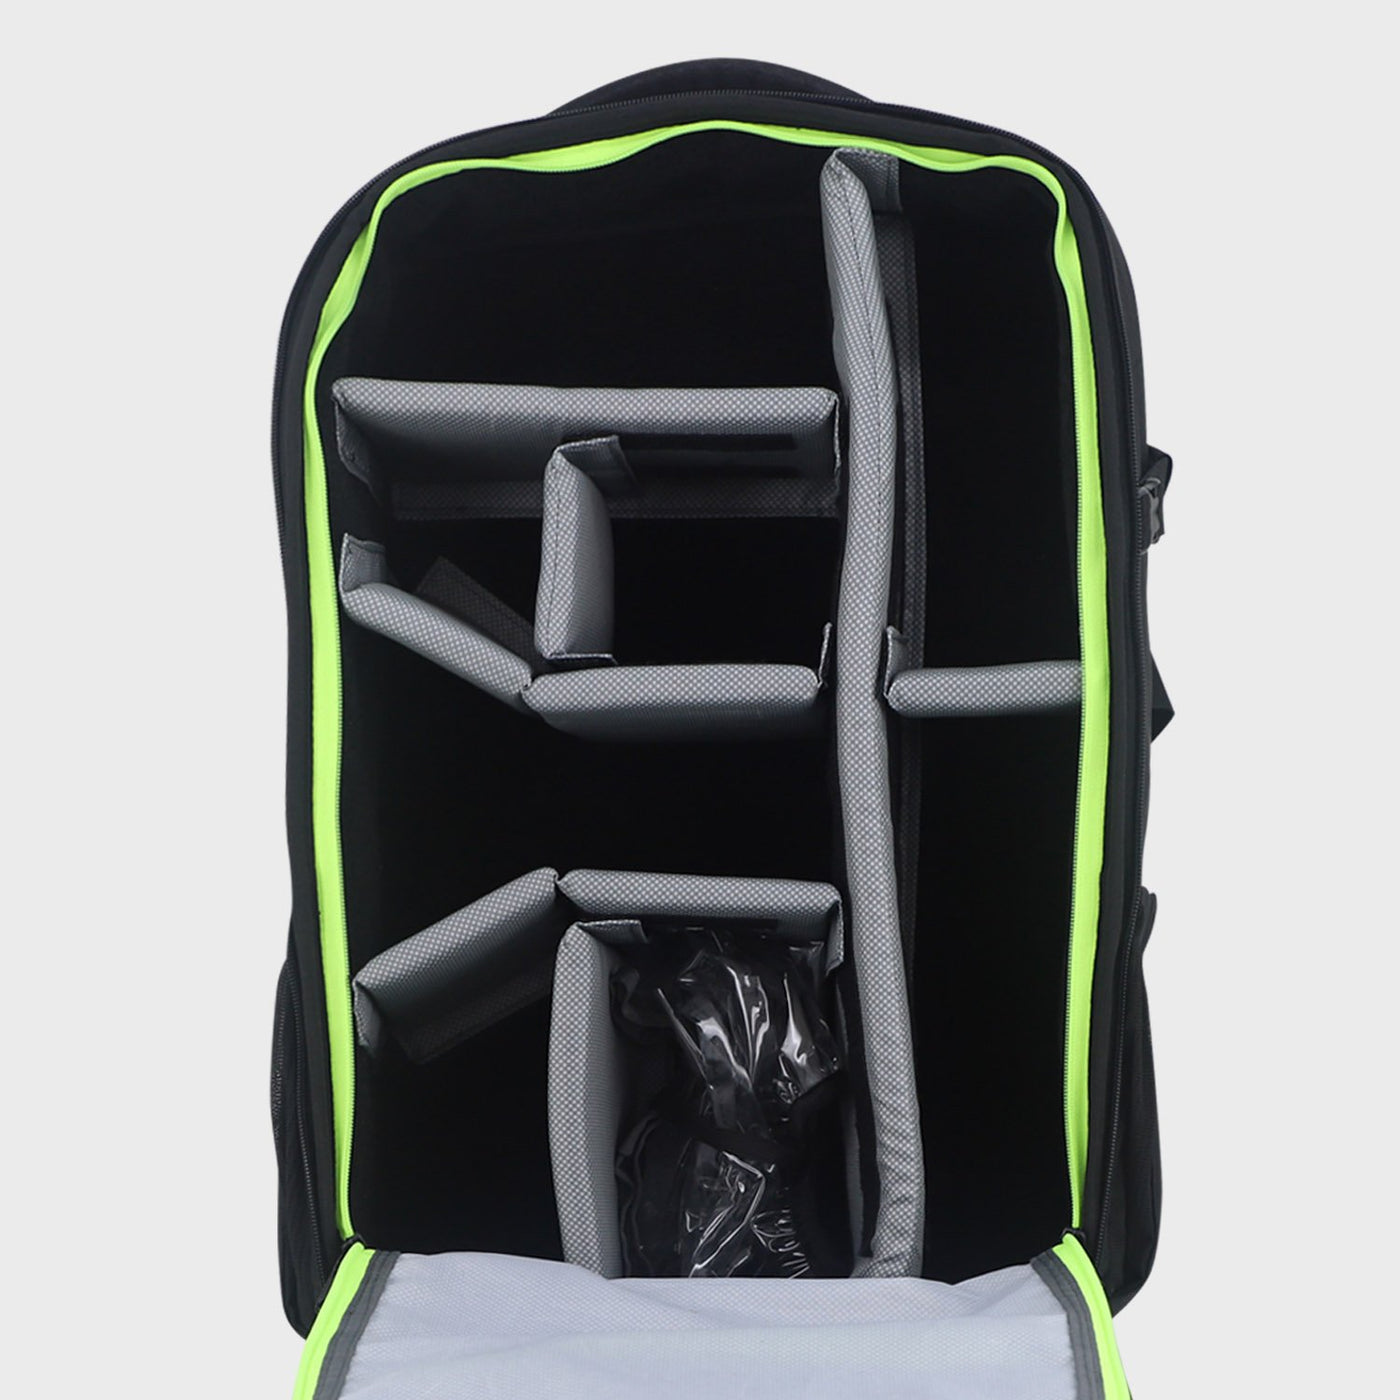 Arctic Fox Click Lime Popsicle Professional Dslr Camera Bag and Camera Backpack - open view